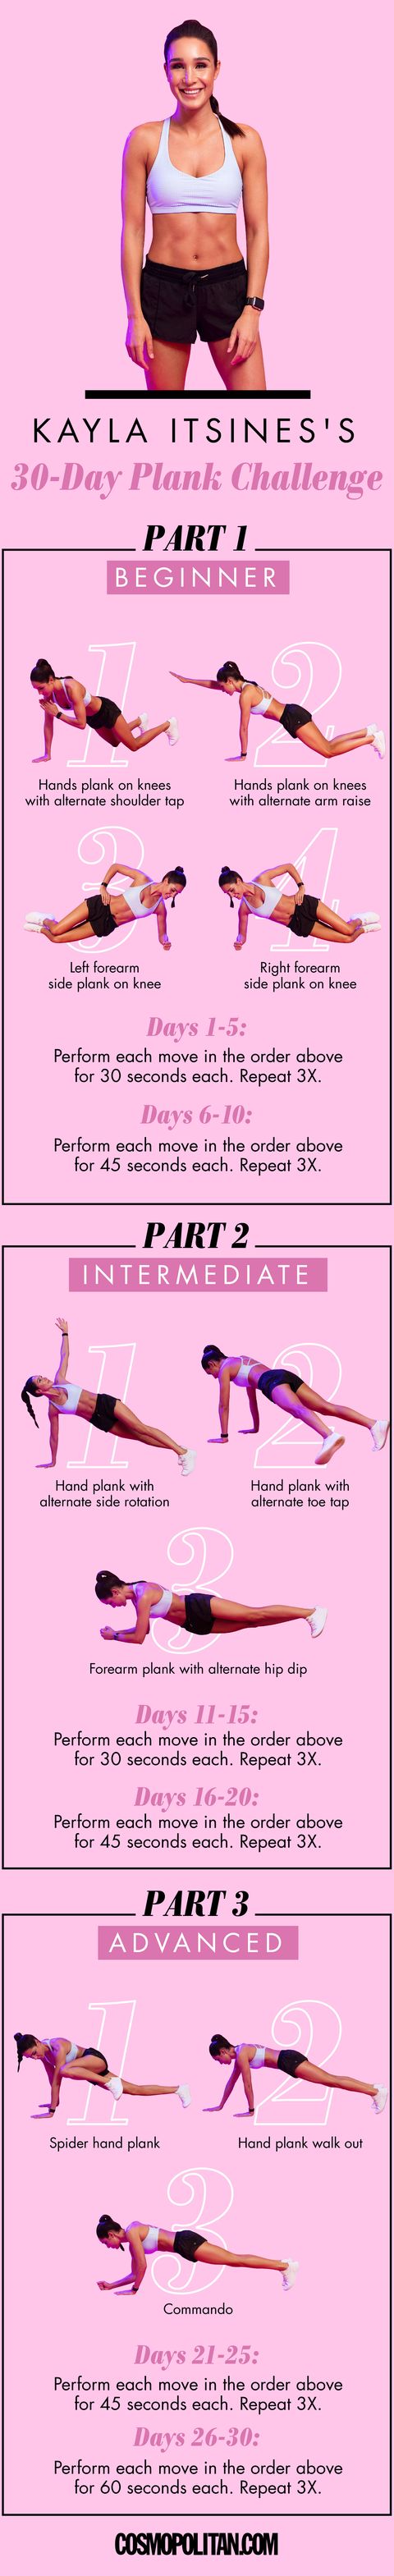 30 Day Plank Challenge How To Do Every Type Of Plank Variation